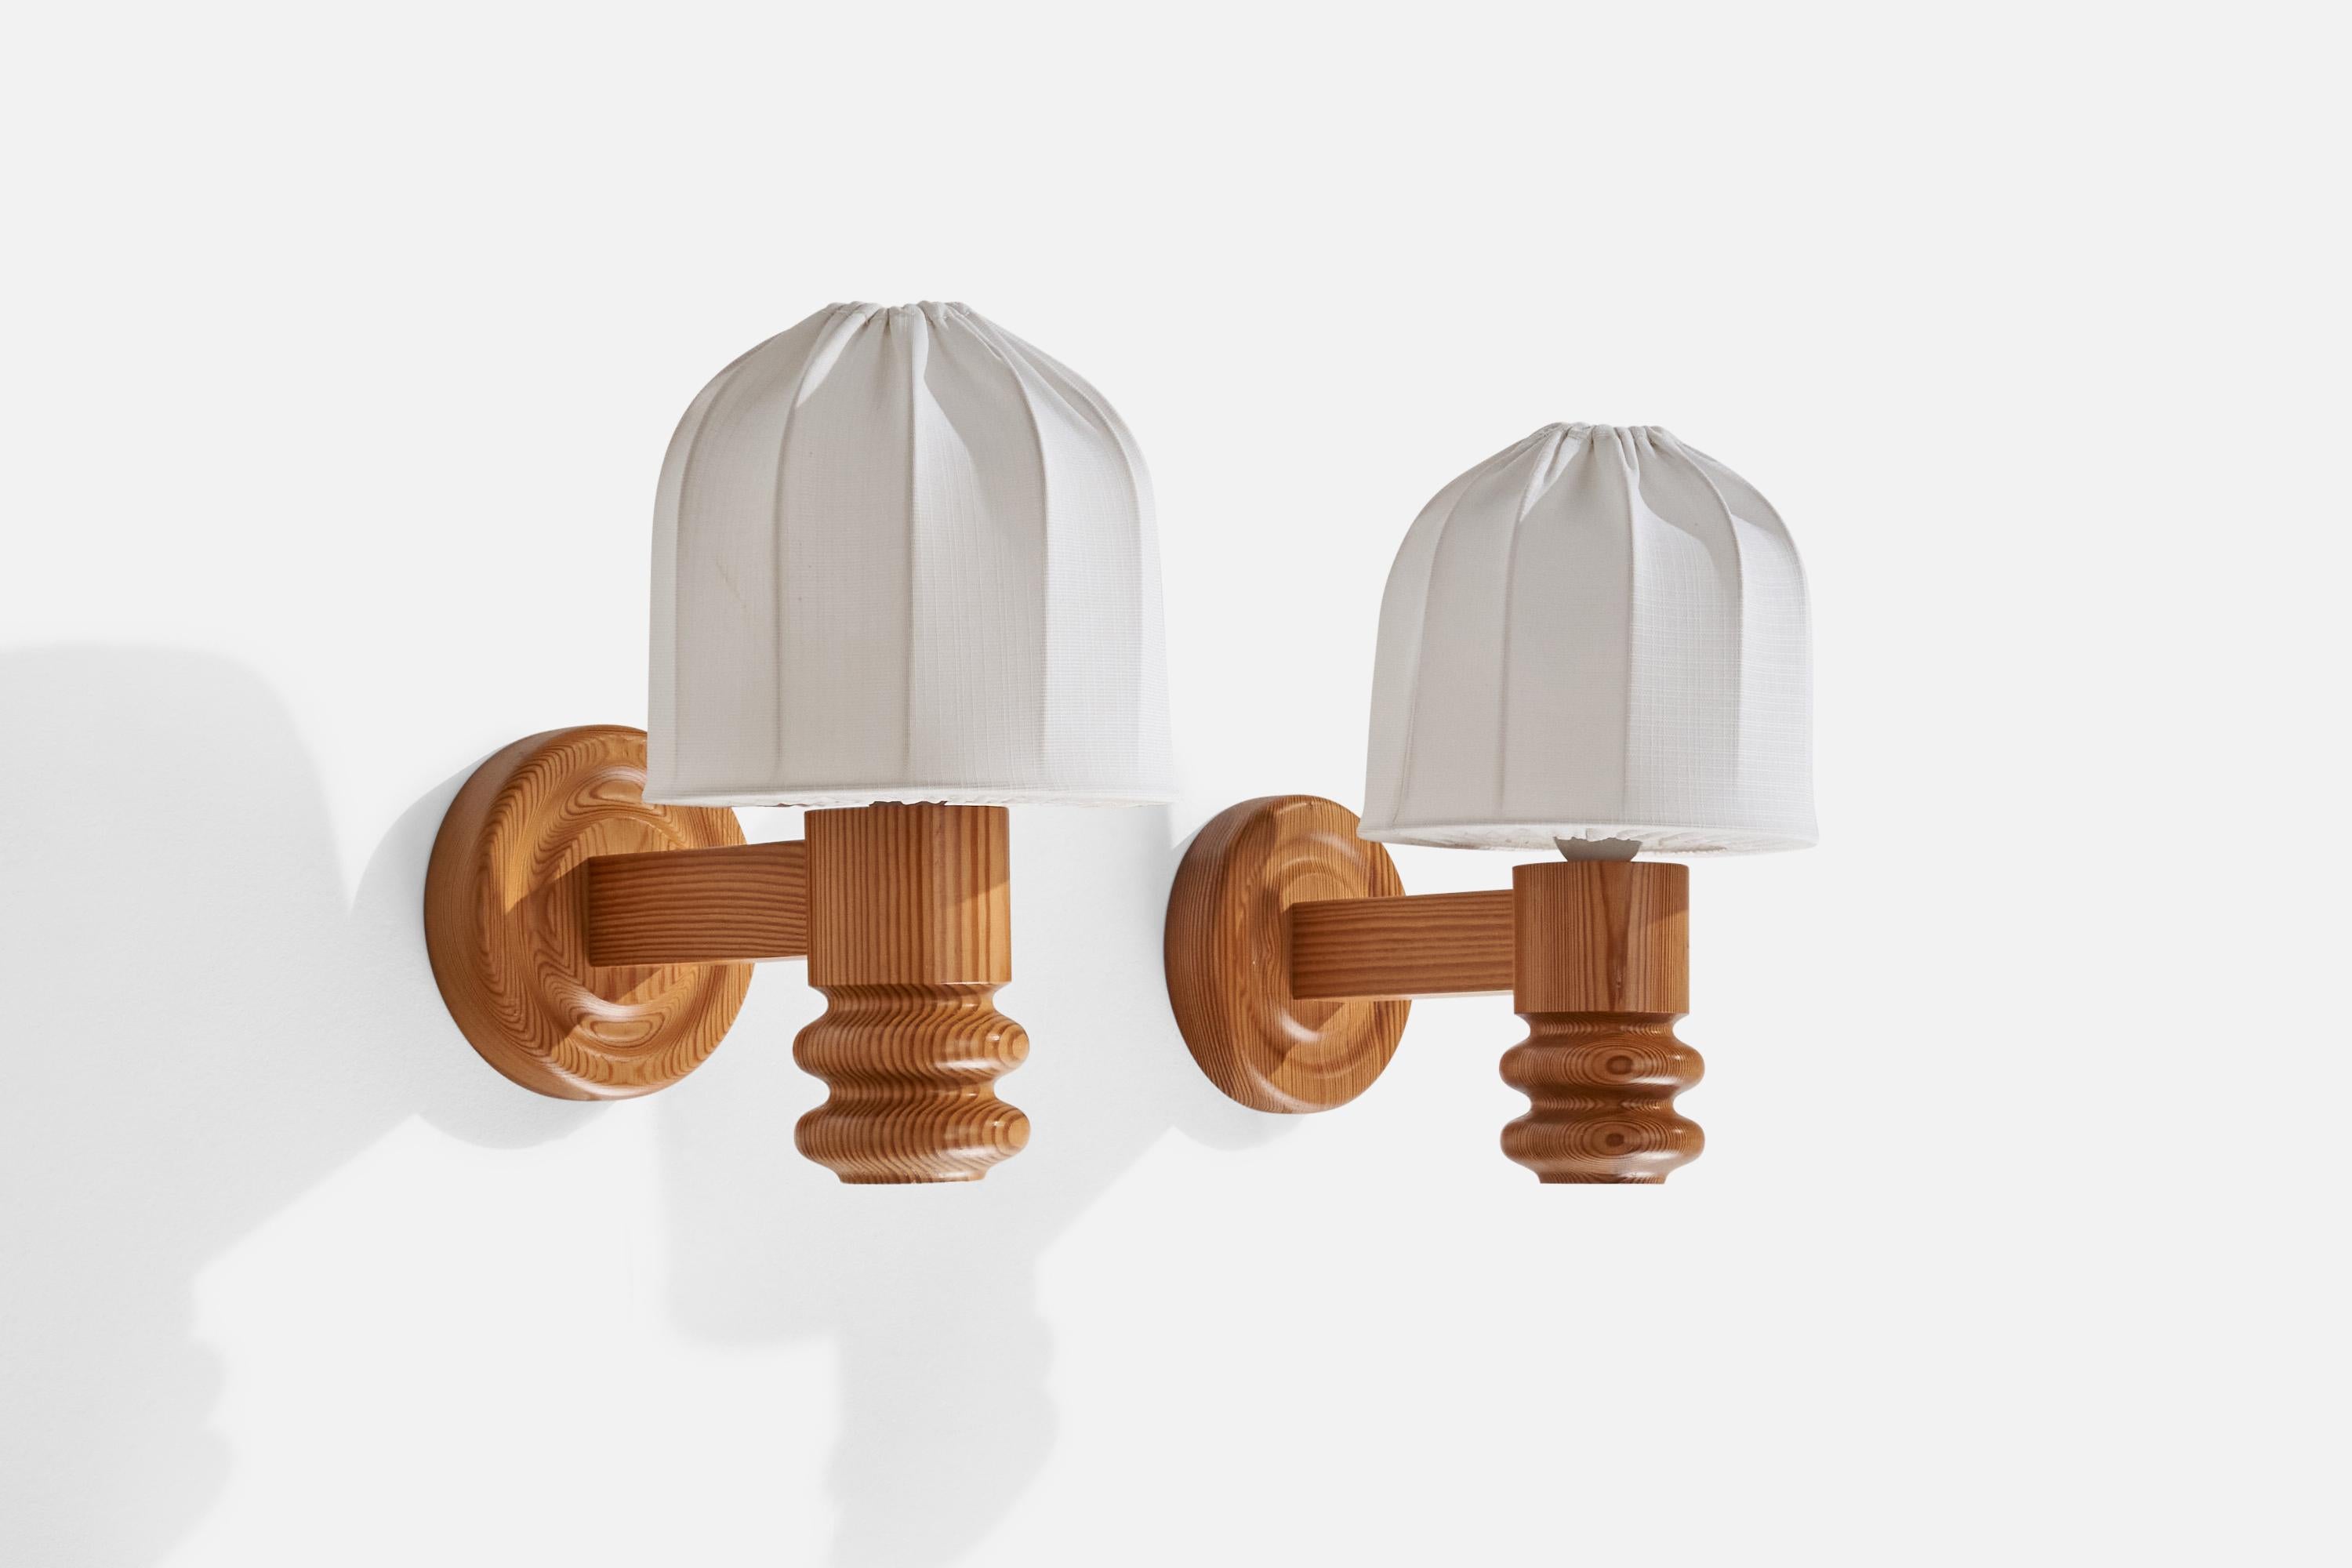 A pair of pine and white fabric wall lights designed and produced in Sweden,  c.1970s.

Overall Dimensions (inches): 12” H x 7.25” W x 10.25” D
Back Plate Dimensions (inches): 5.22” H x 1.05” D
Bulb Specifications: E-26 Bulb
Number of Sockets: 2
All